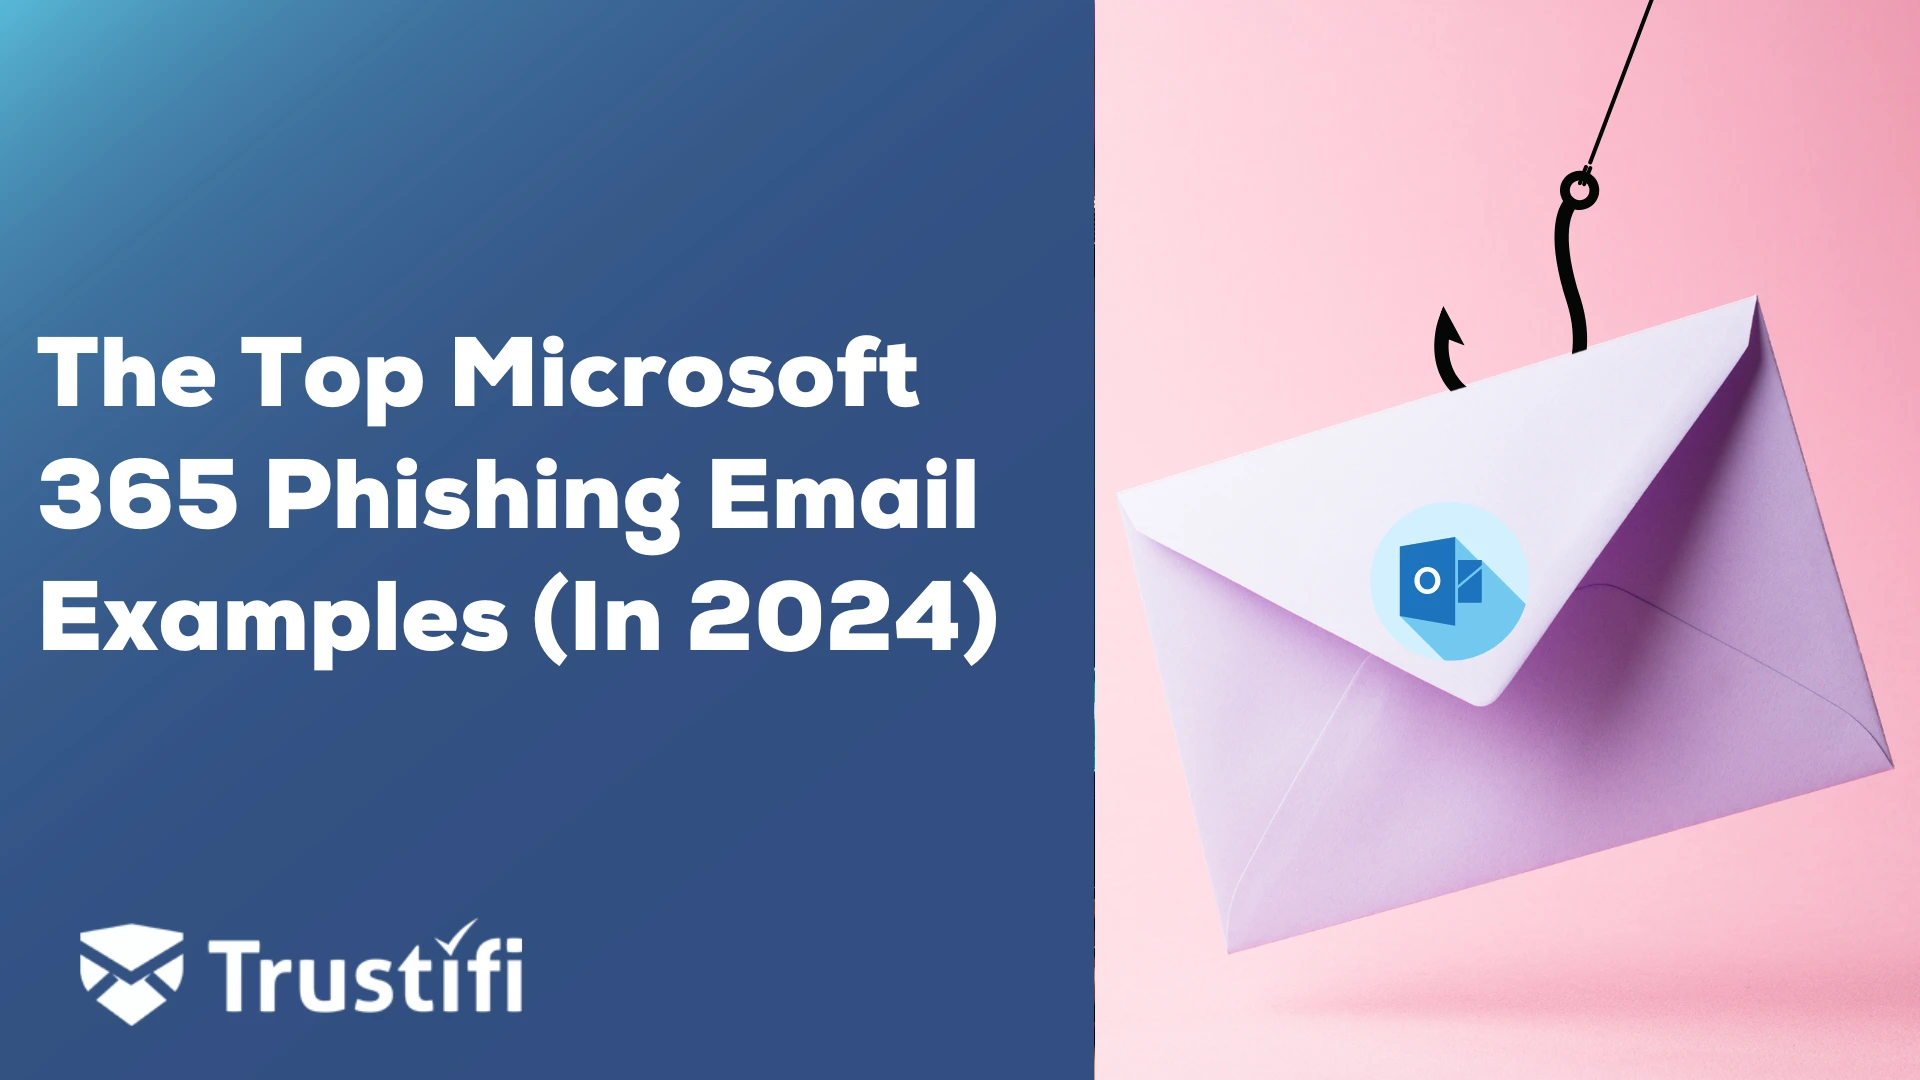 What Are The Top Microsoft 365 Phishing Email Examples in 2024?